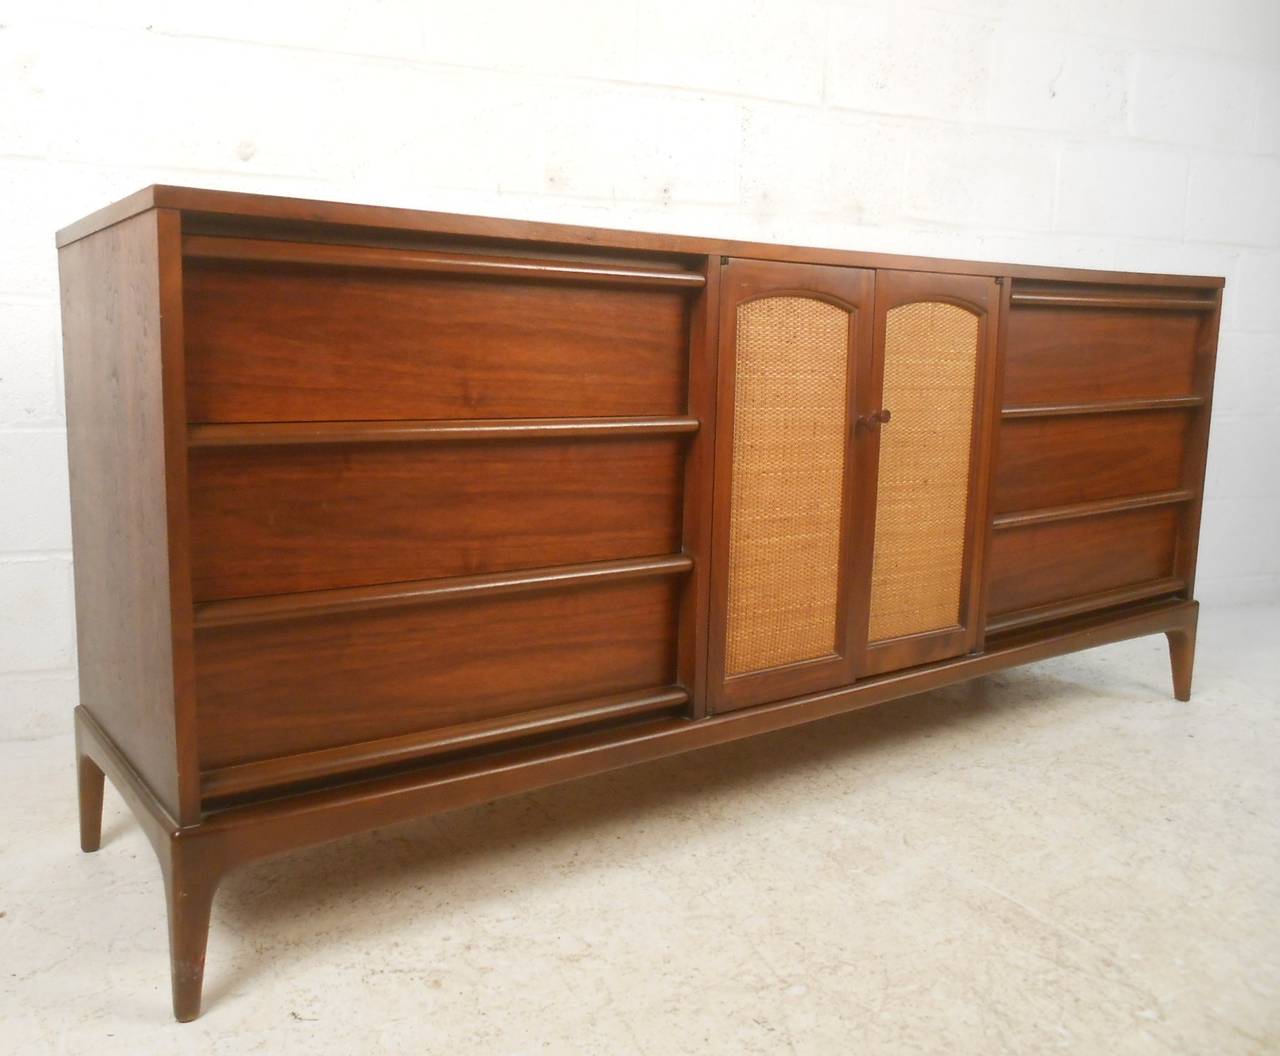 This gorgeous mid-century dresser combines modern lines with tapered legs and cane front cabinet doors to make a spectacular storage piece for any setting. With nine drawers for excessive organization the lovely wood finish of this piece contrasts 